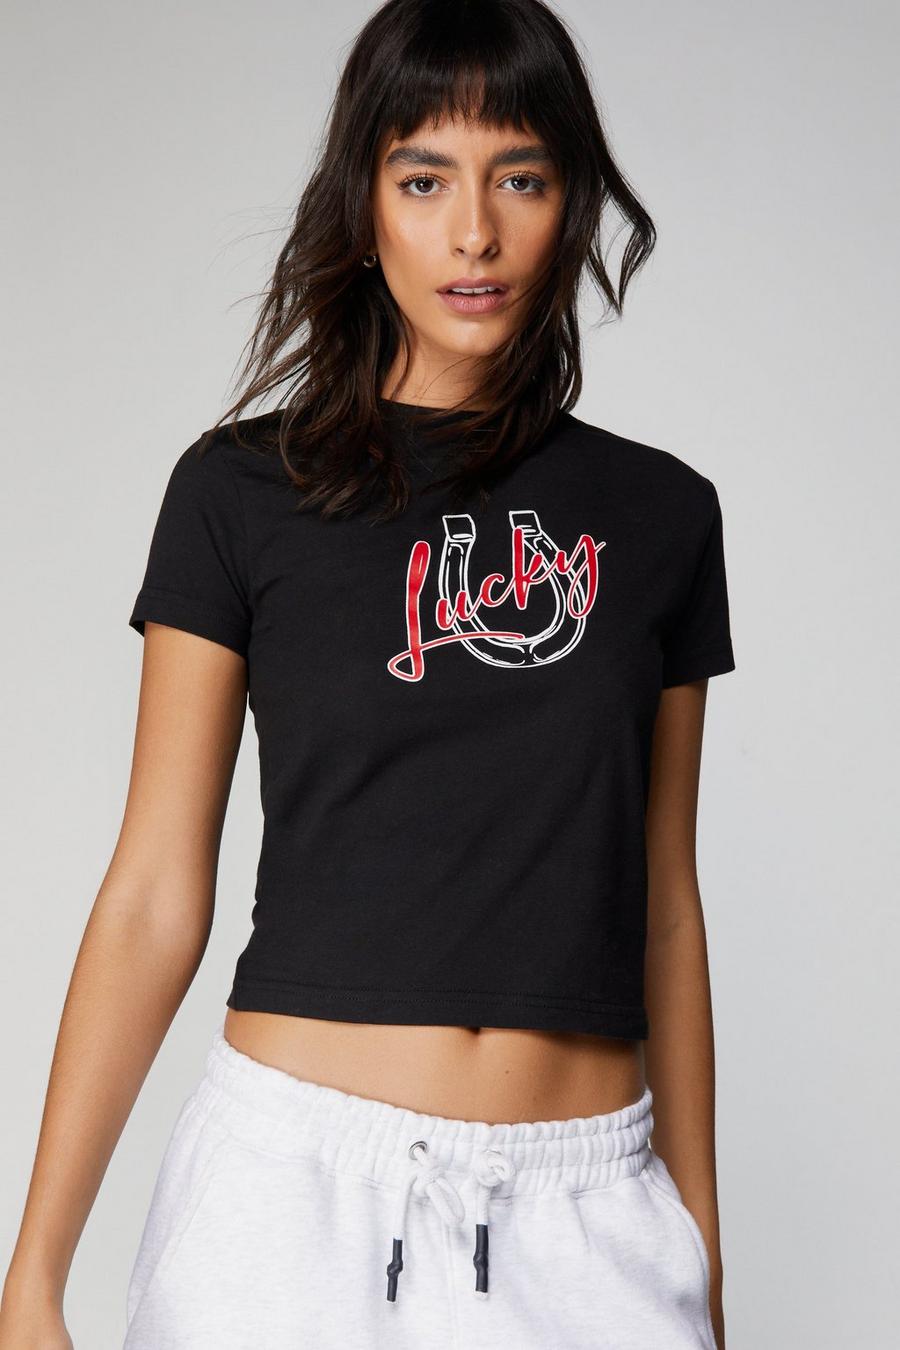 Lucky Graphic Baby Tee